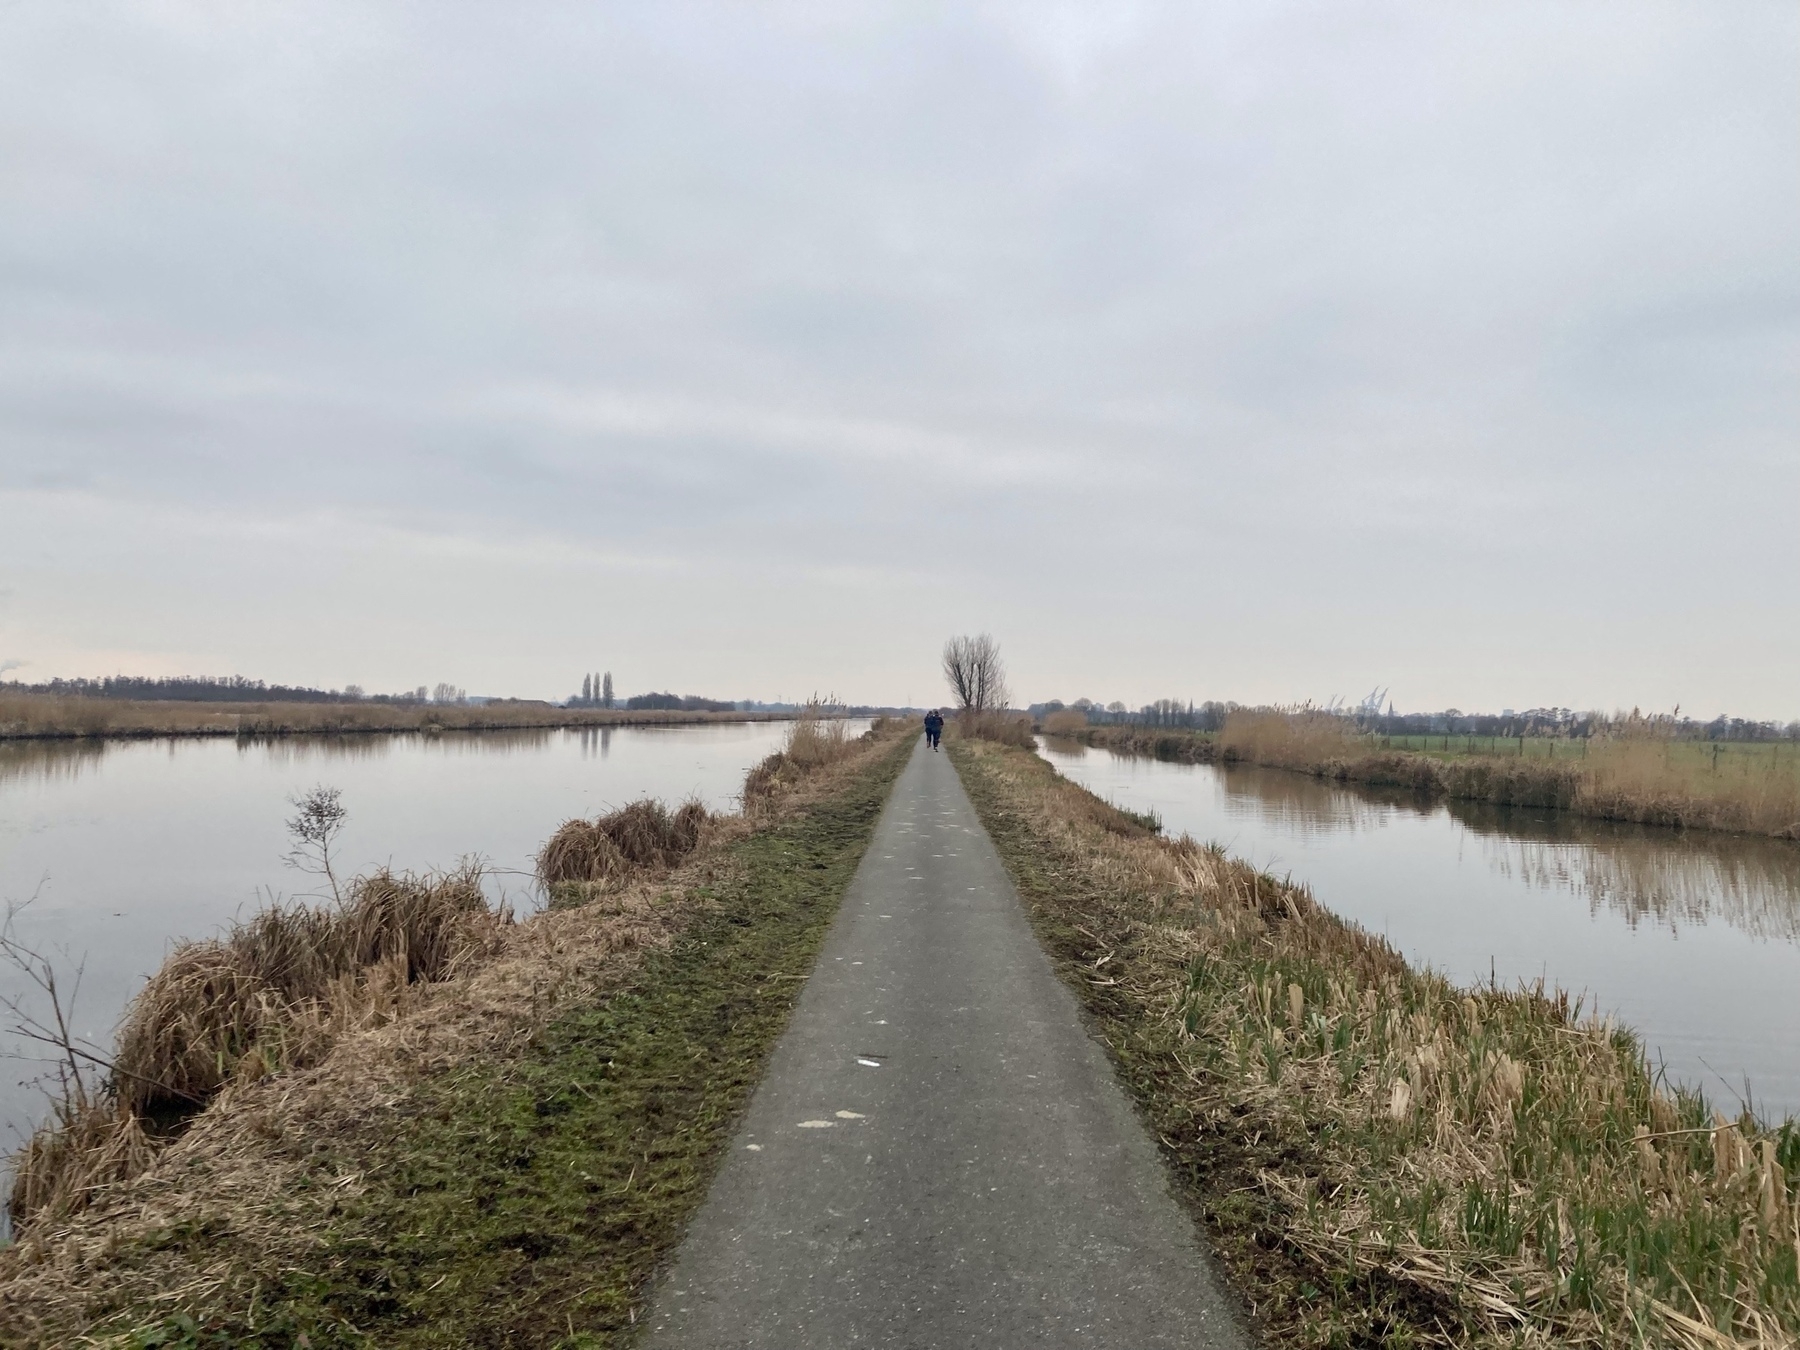 straight bike path with canals to the right and left and grassy landscape